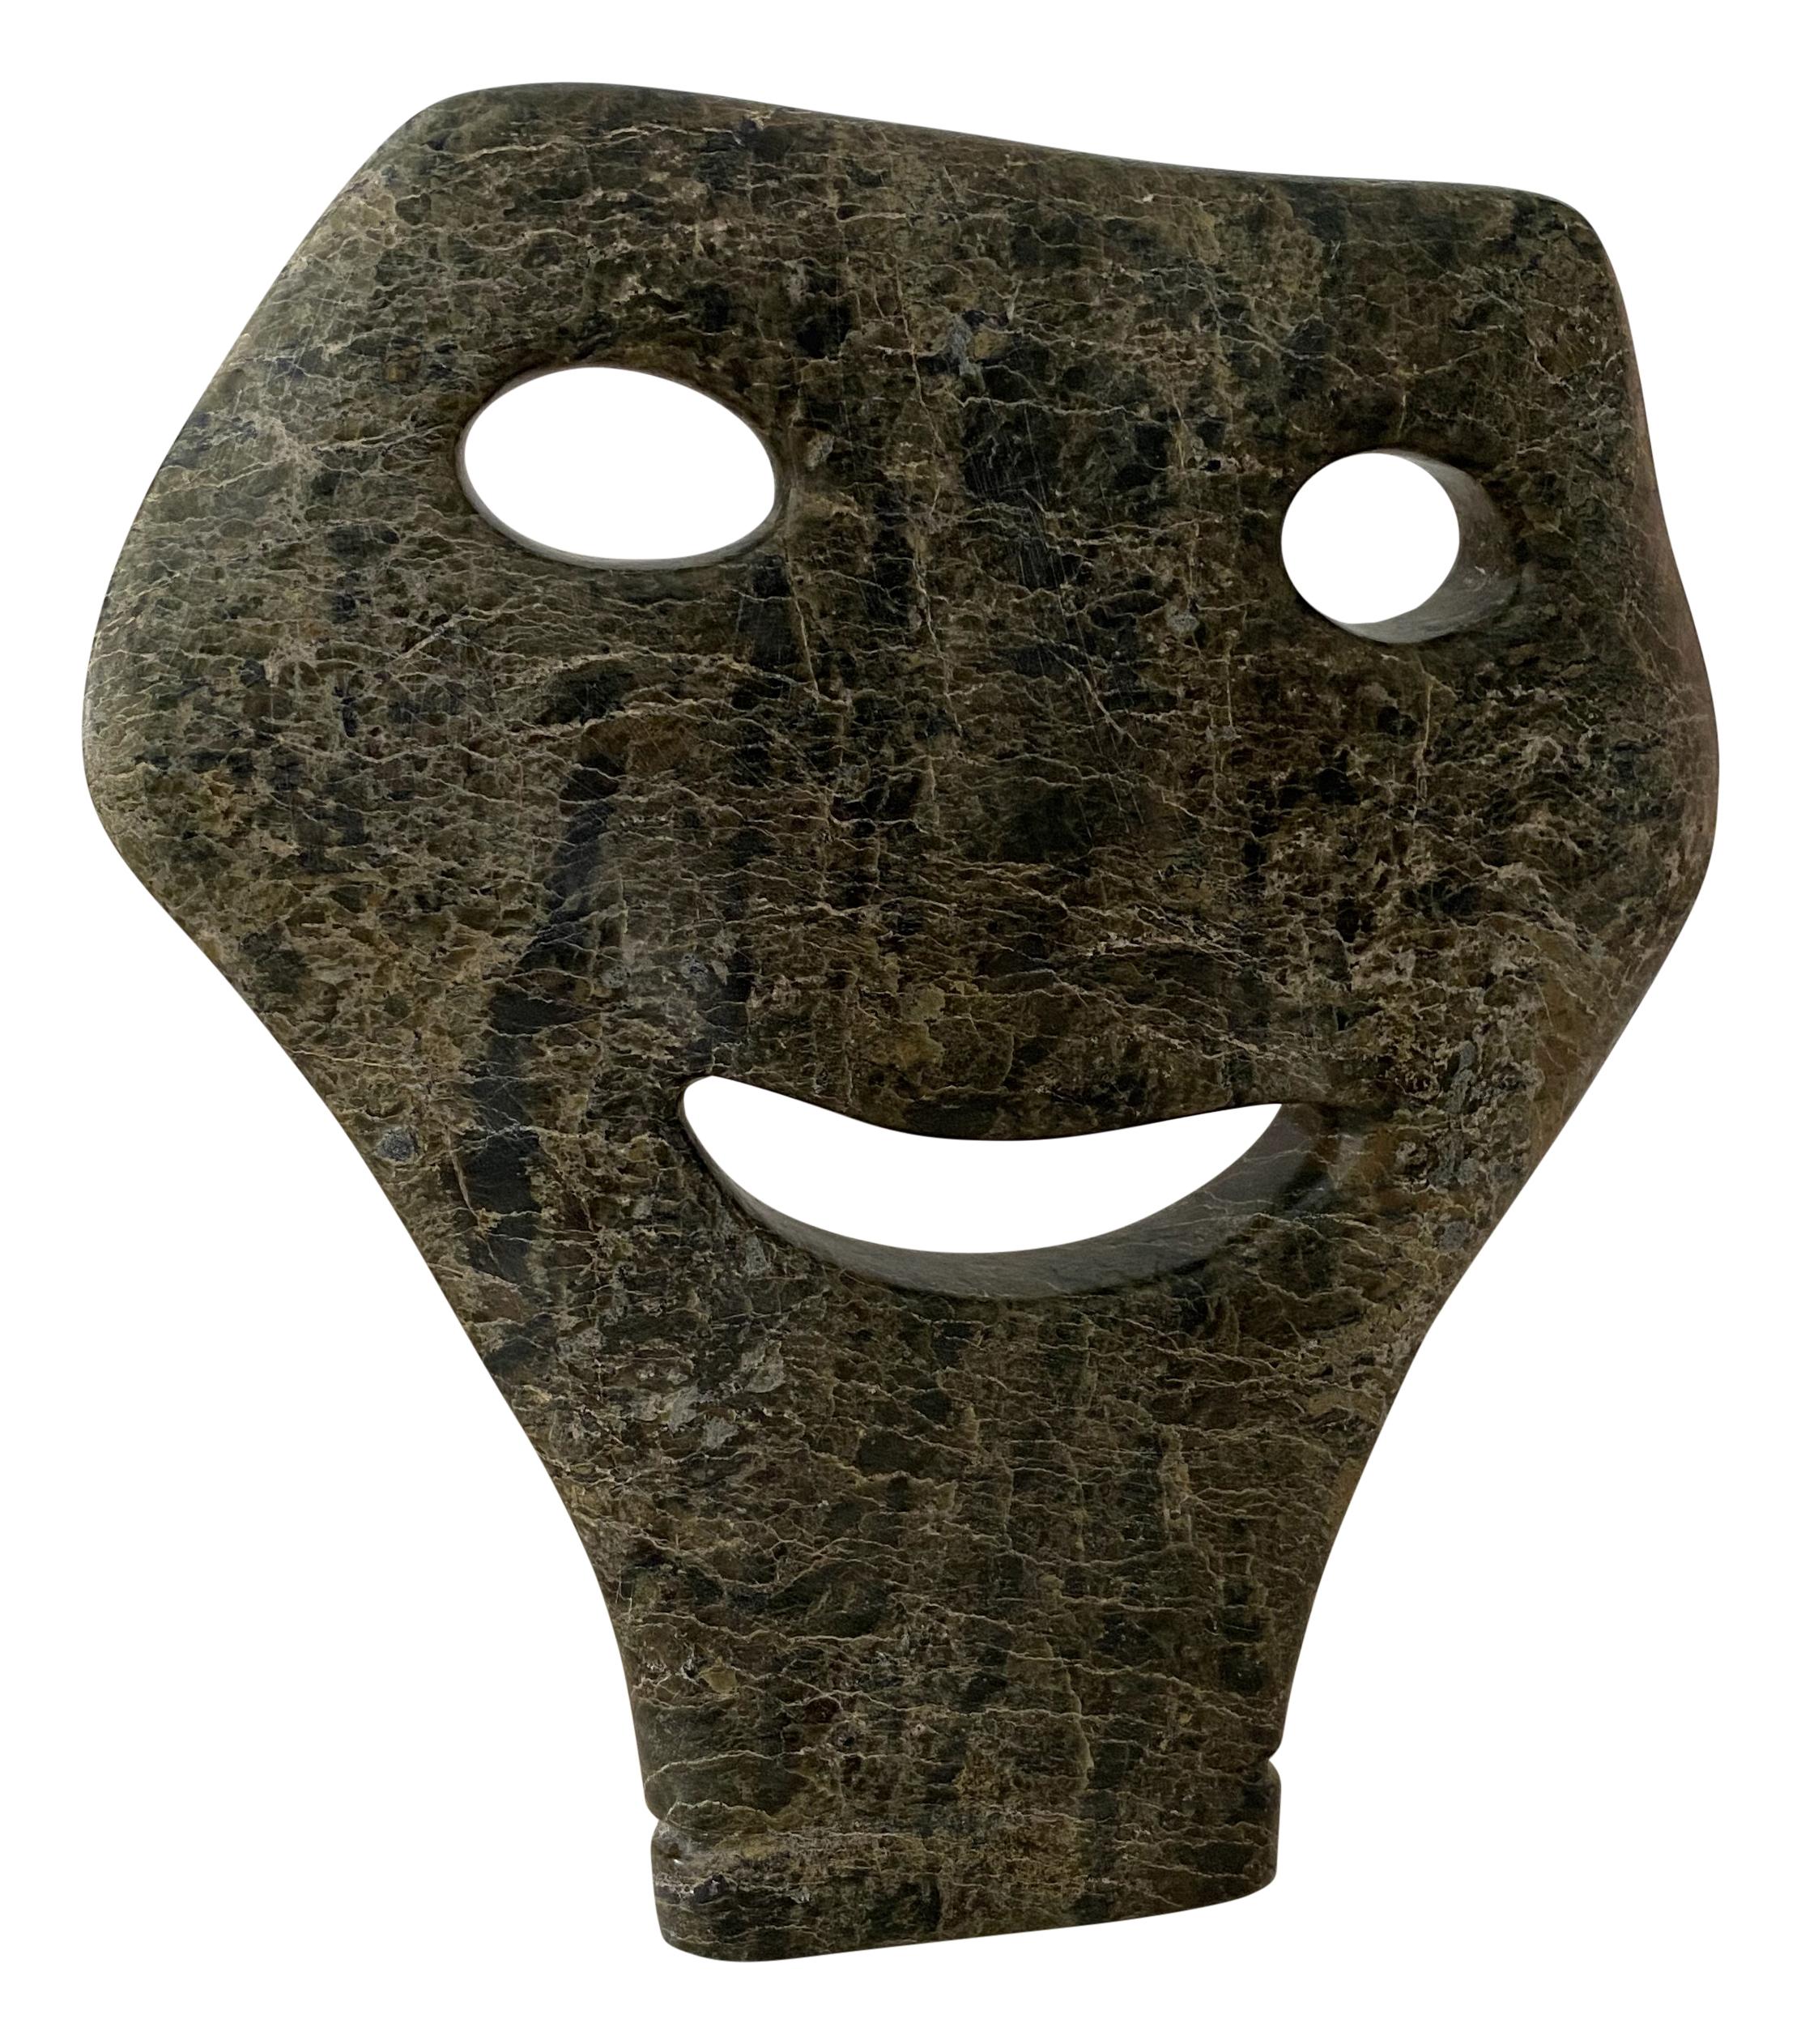 Unknown Intuit Carved Greenstone Mask Figurative Sculpture For Sale